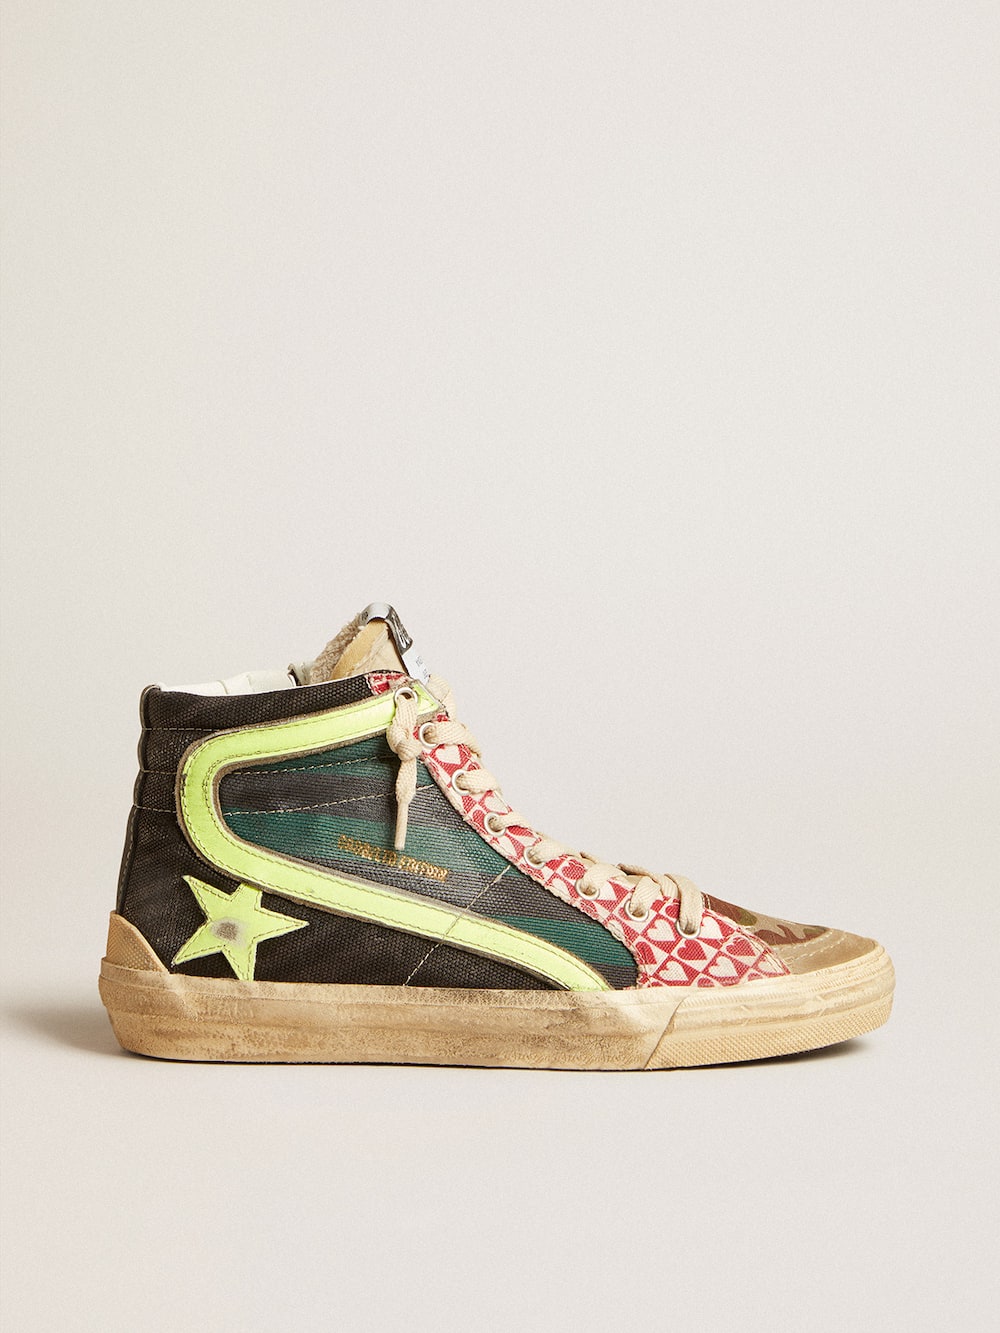 Golden Goose - Men’s Slide LAB in camo canvas with yellow leather star and flash in 